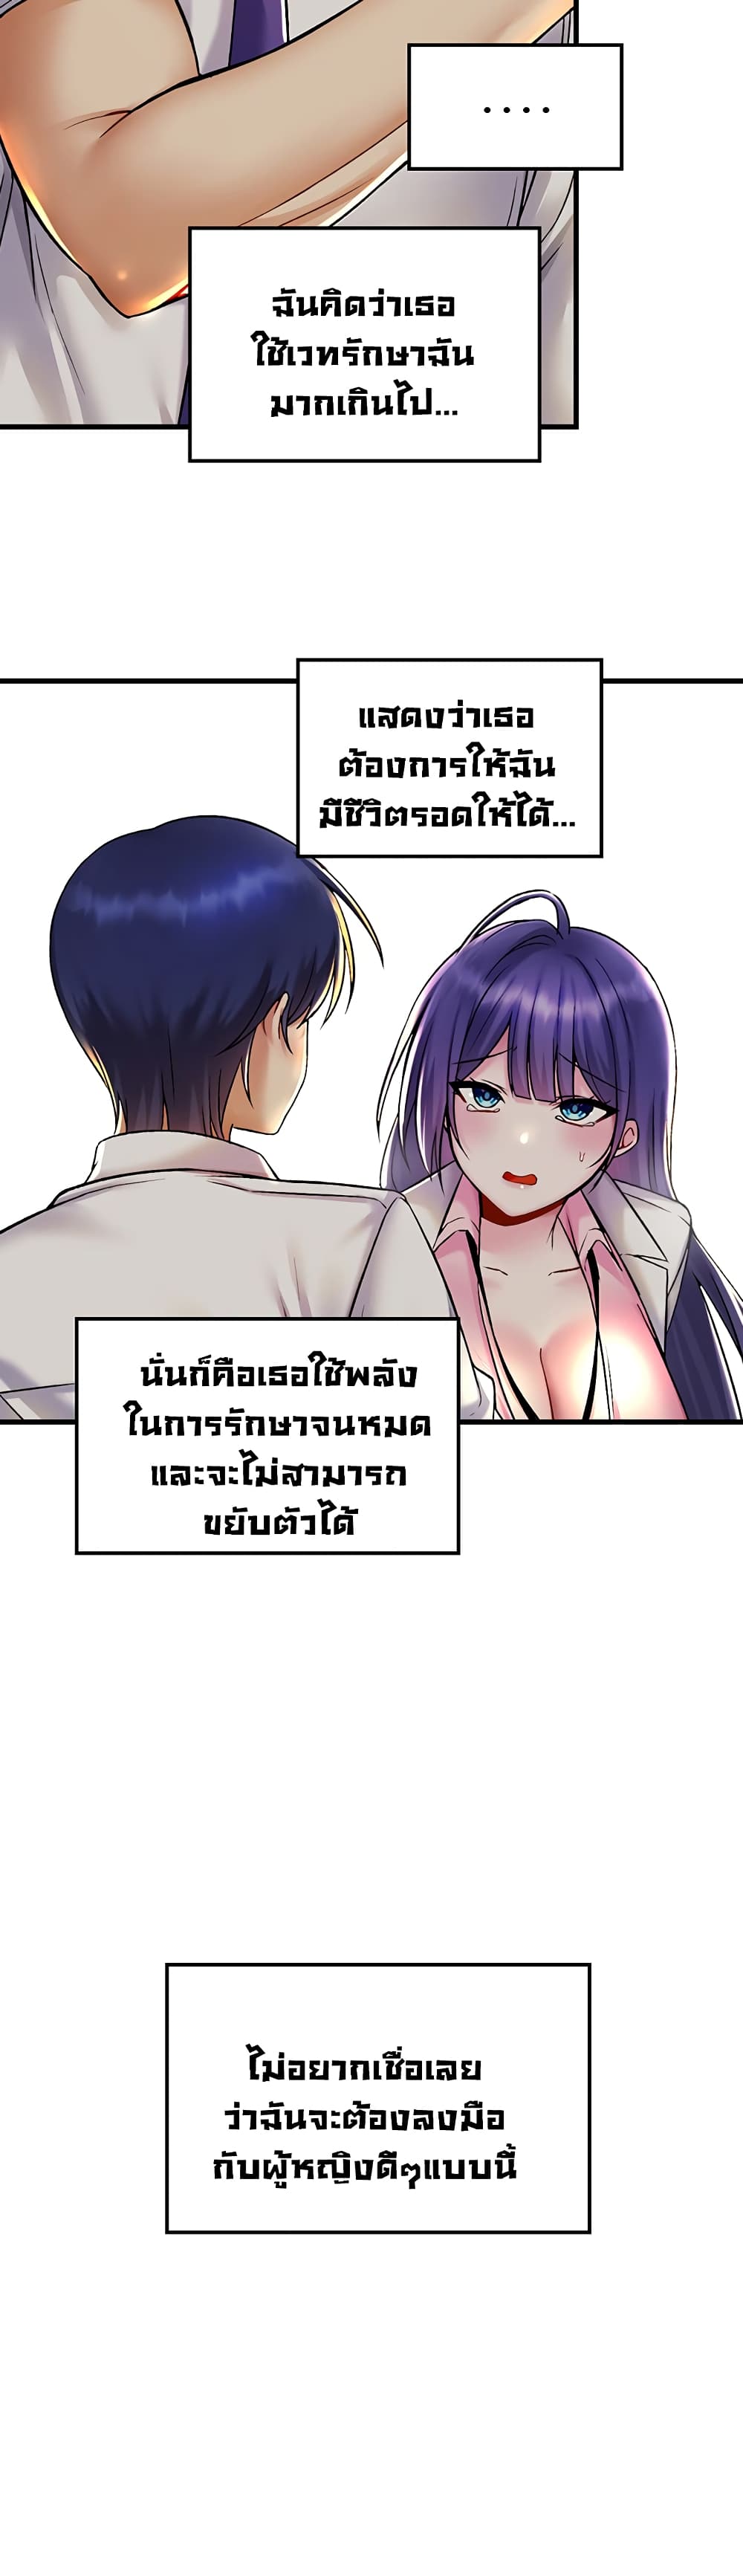 Trapped in the Academy’s Eroge 29 ภาพที่ 12